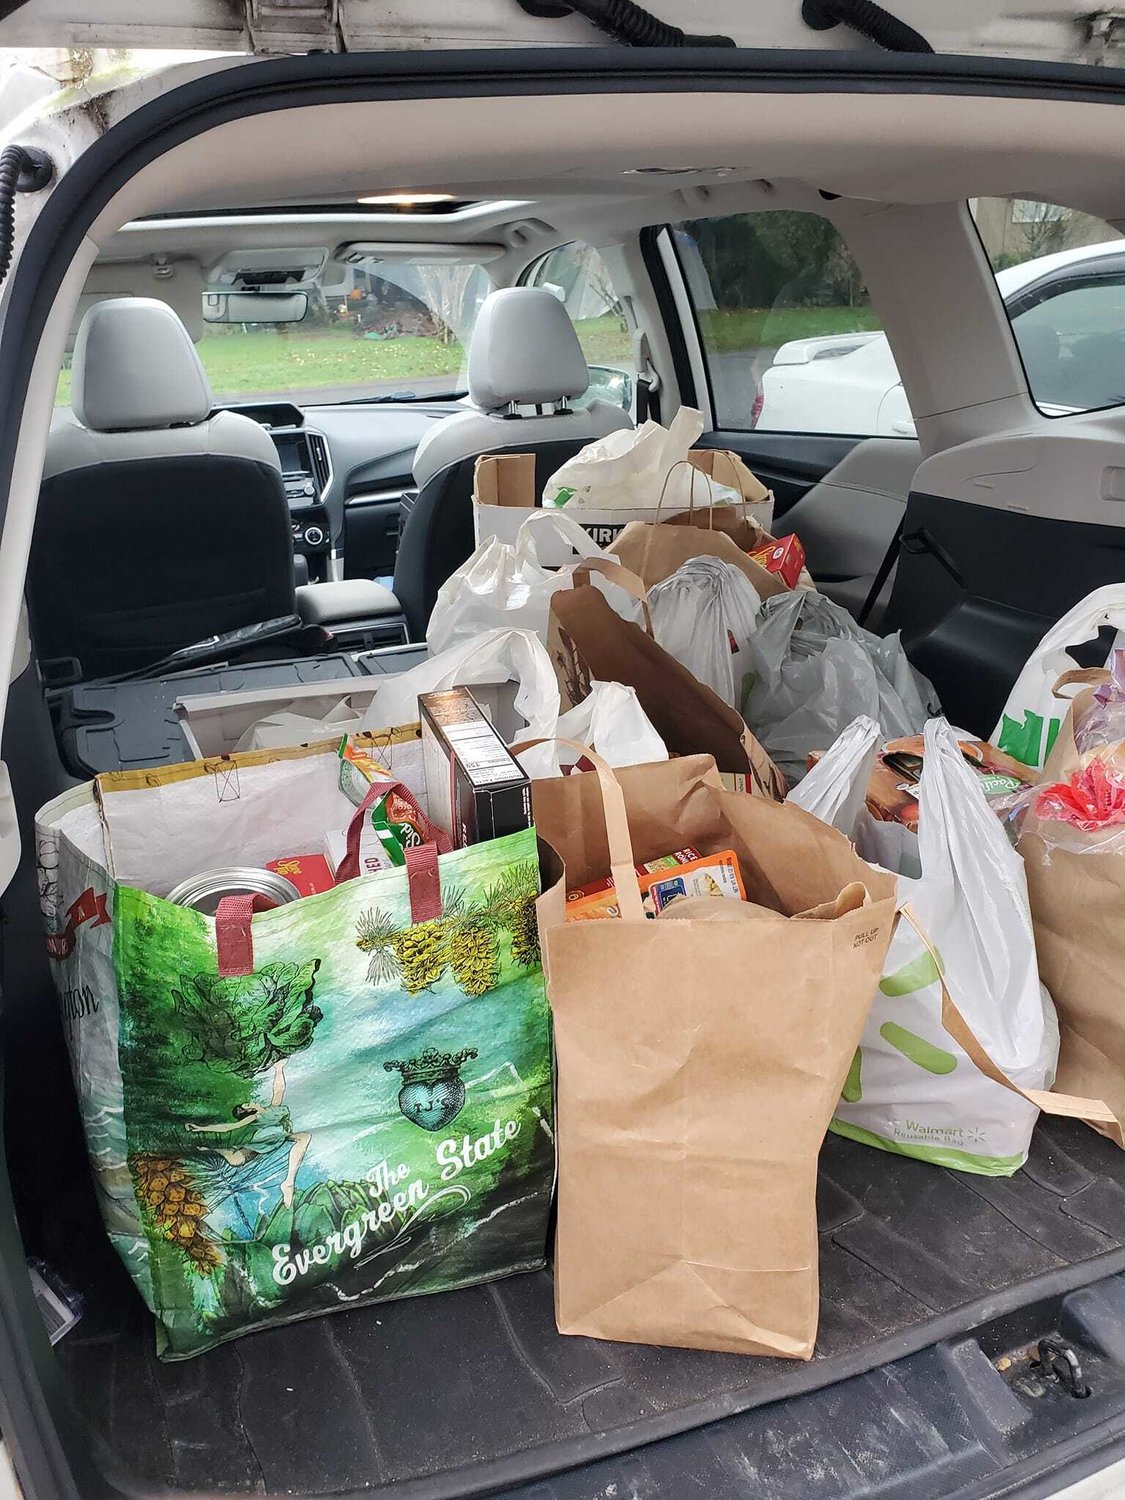 During this year’s annual Thanksgiving River Run, 80 participants donated 240 pounds of food to the local food bank.